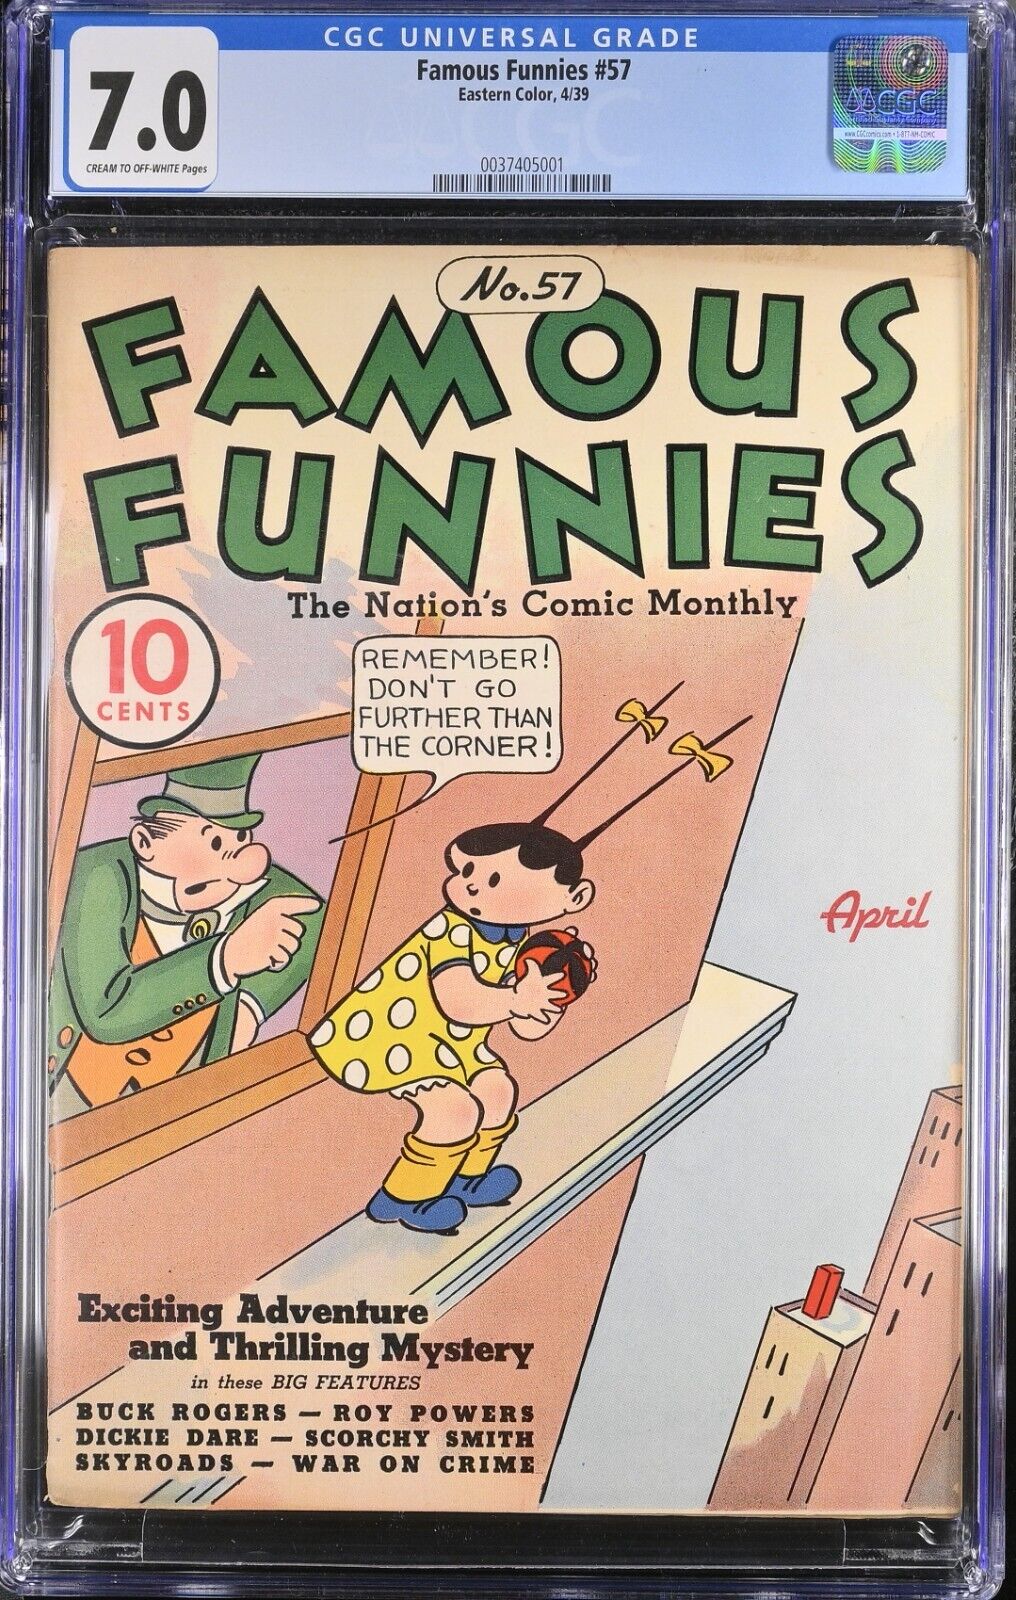 Famous Funnies #57 CGC 7.0 (1939 Eastern Color)